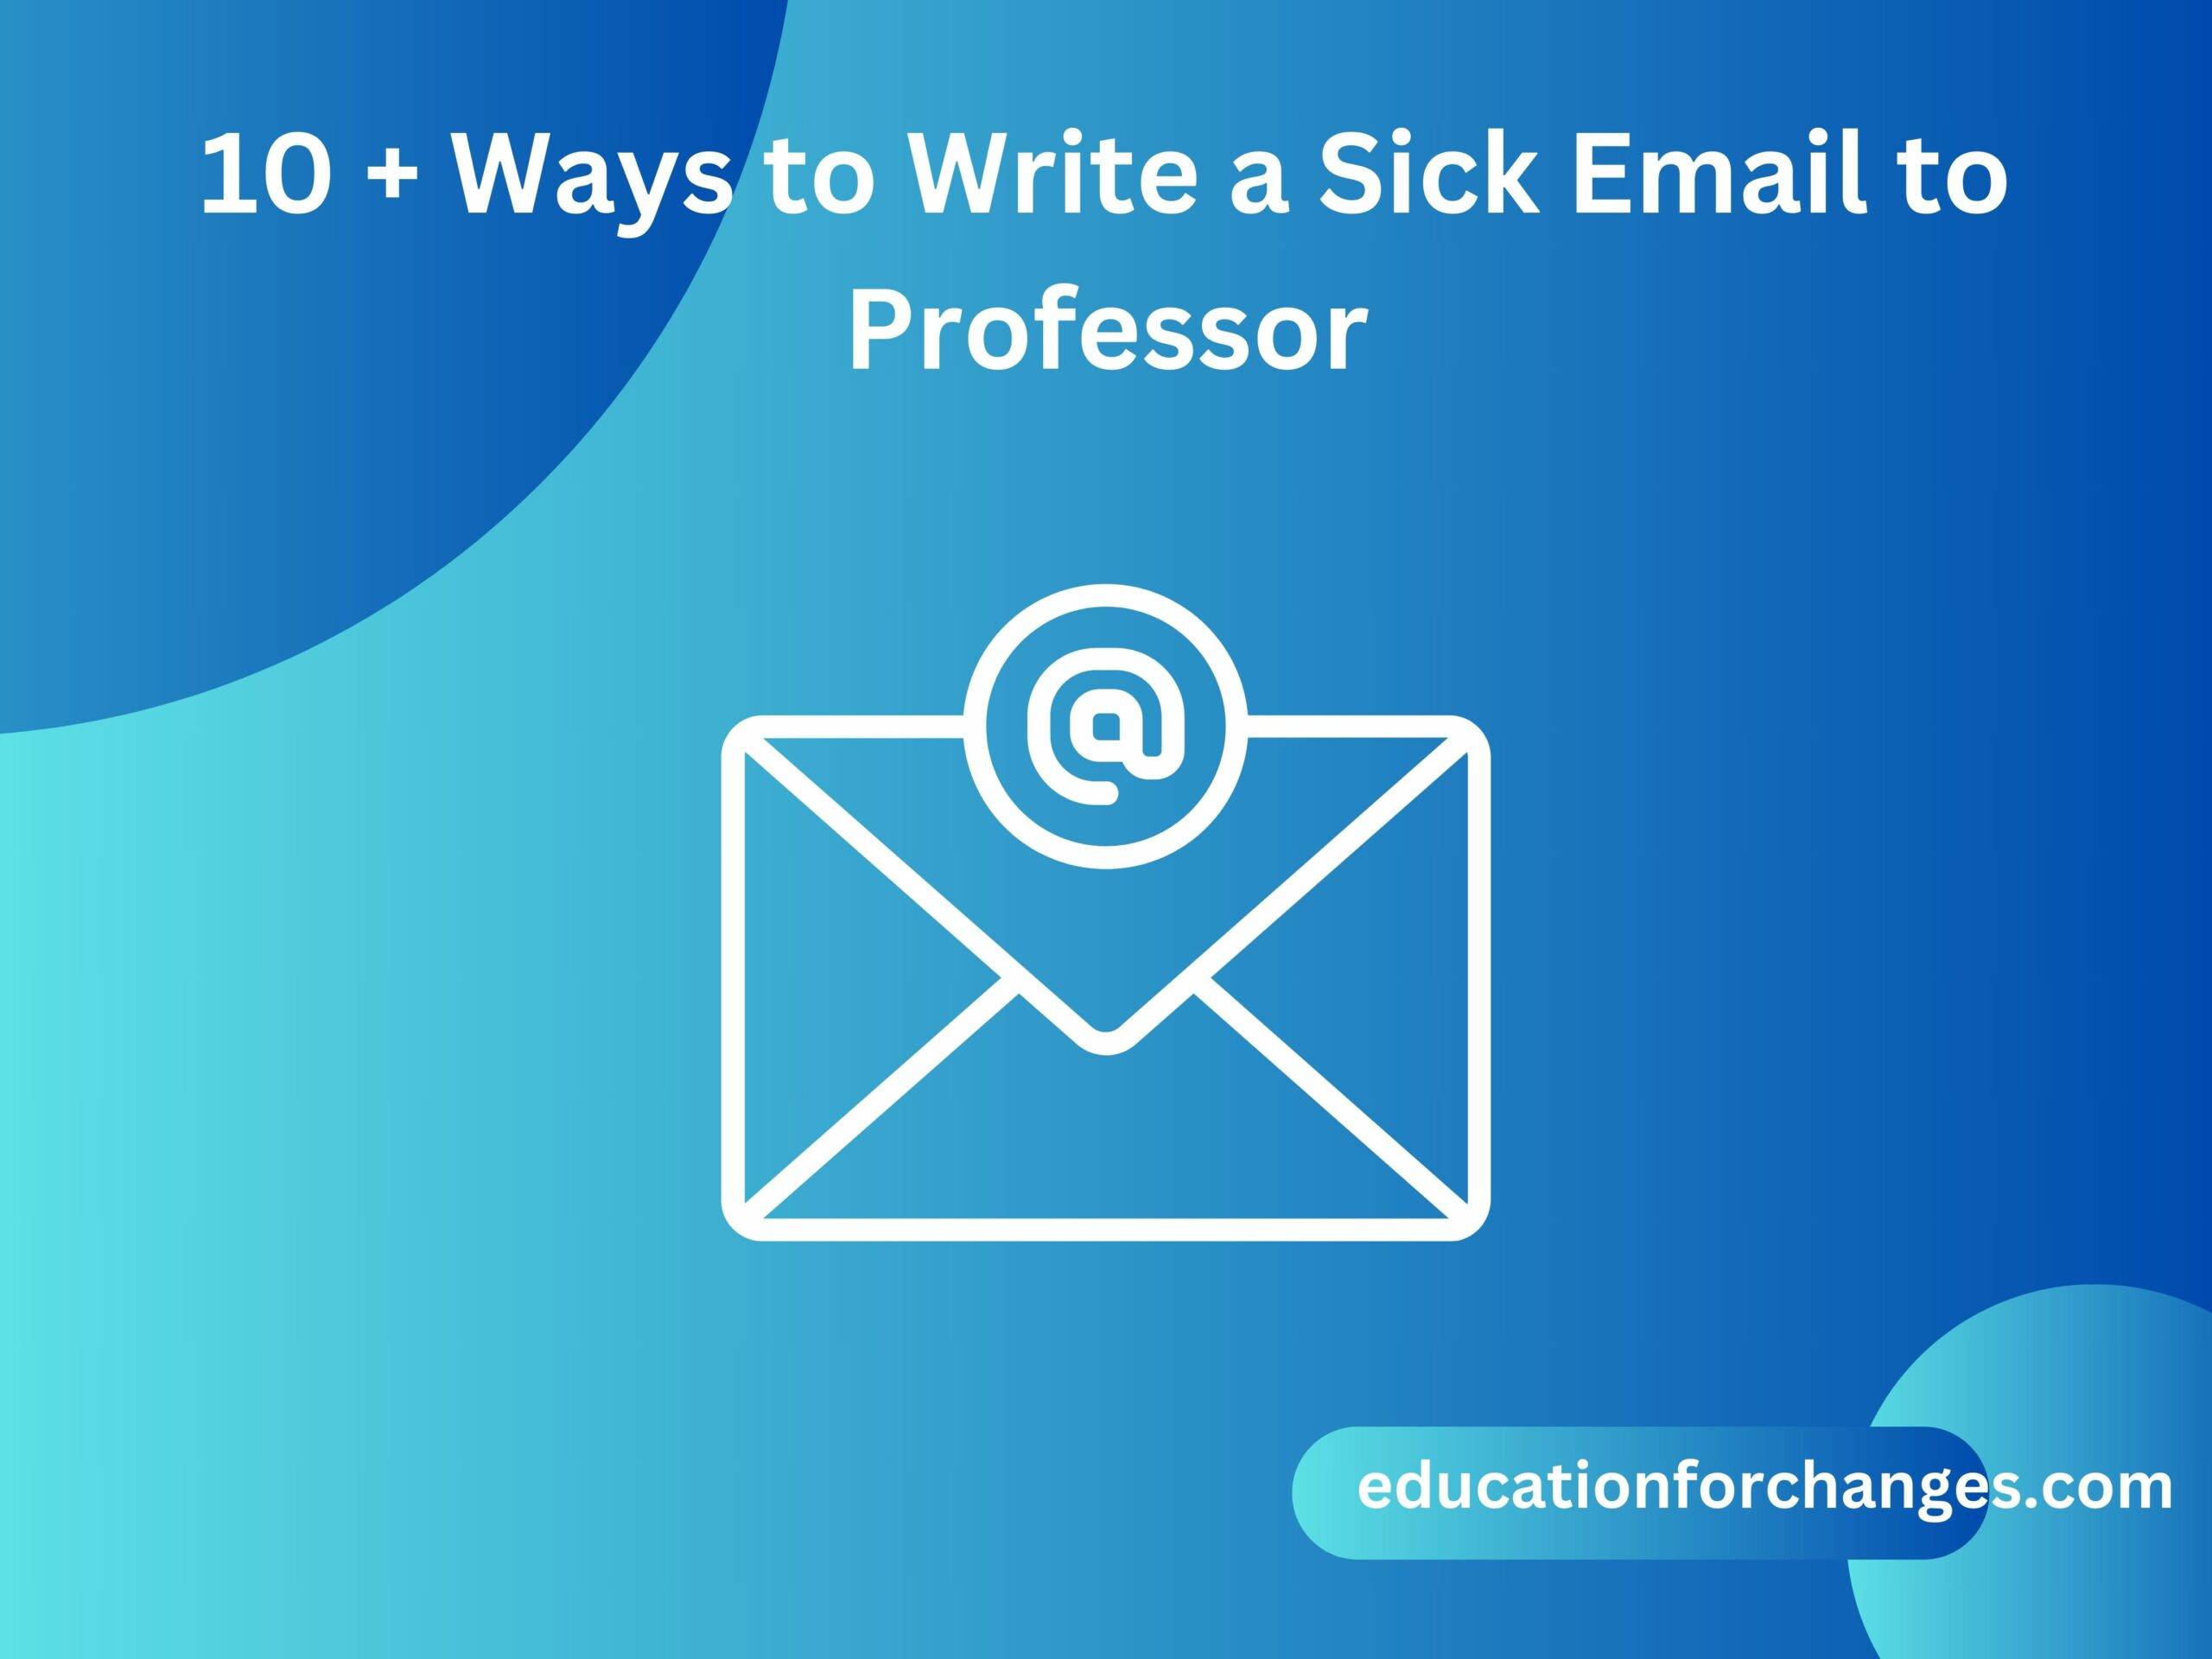 10 + Ways to Write a Sick Email to Professor